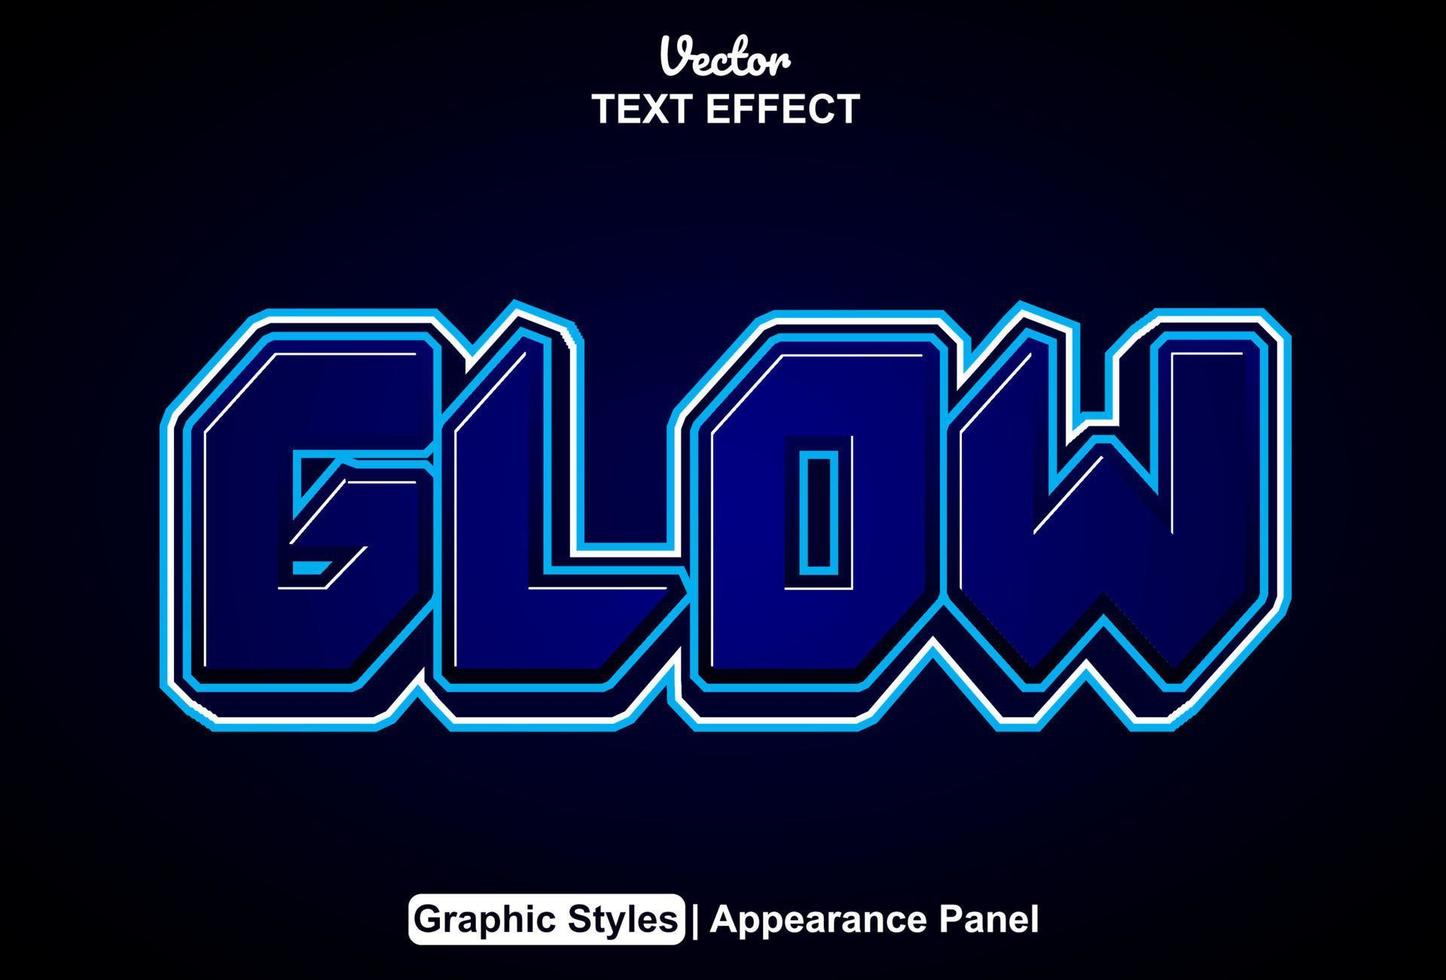 glow text effect with graphic style and editable. vector